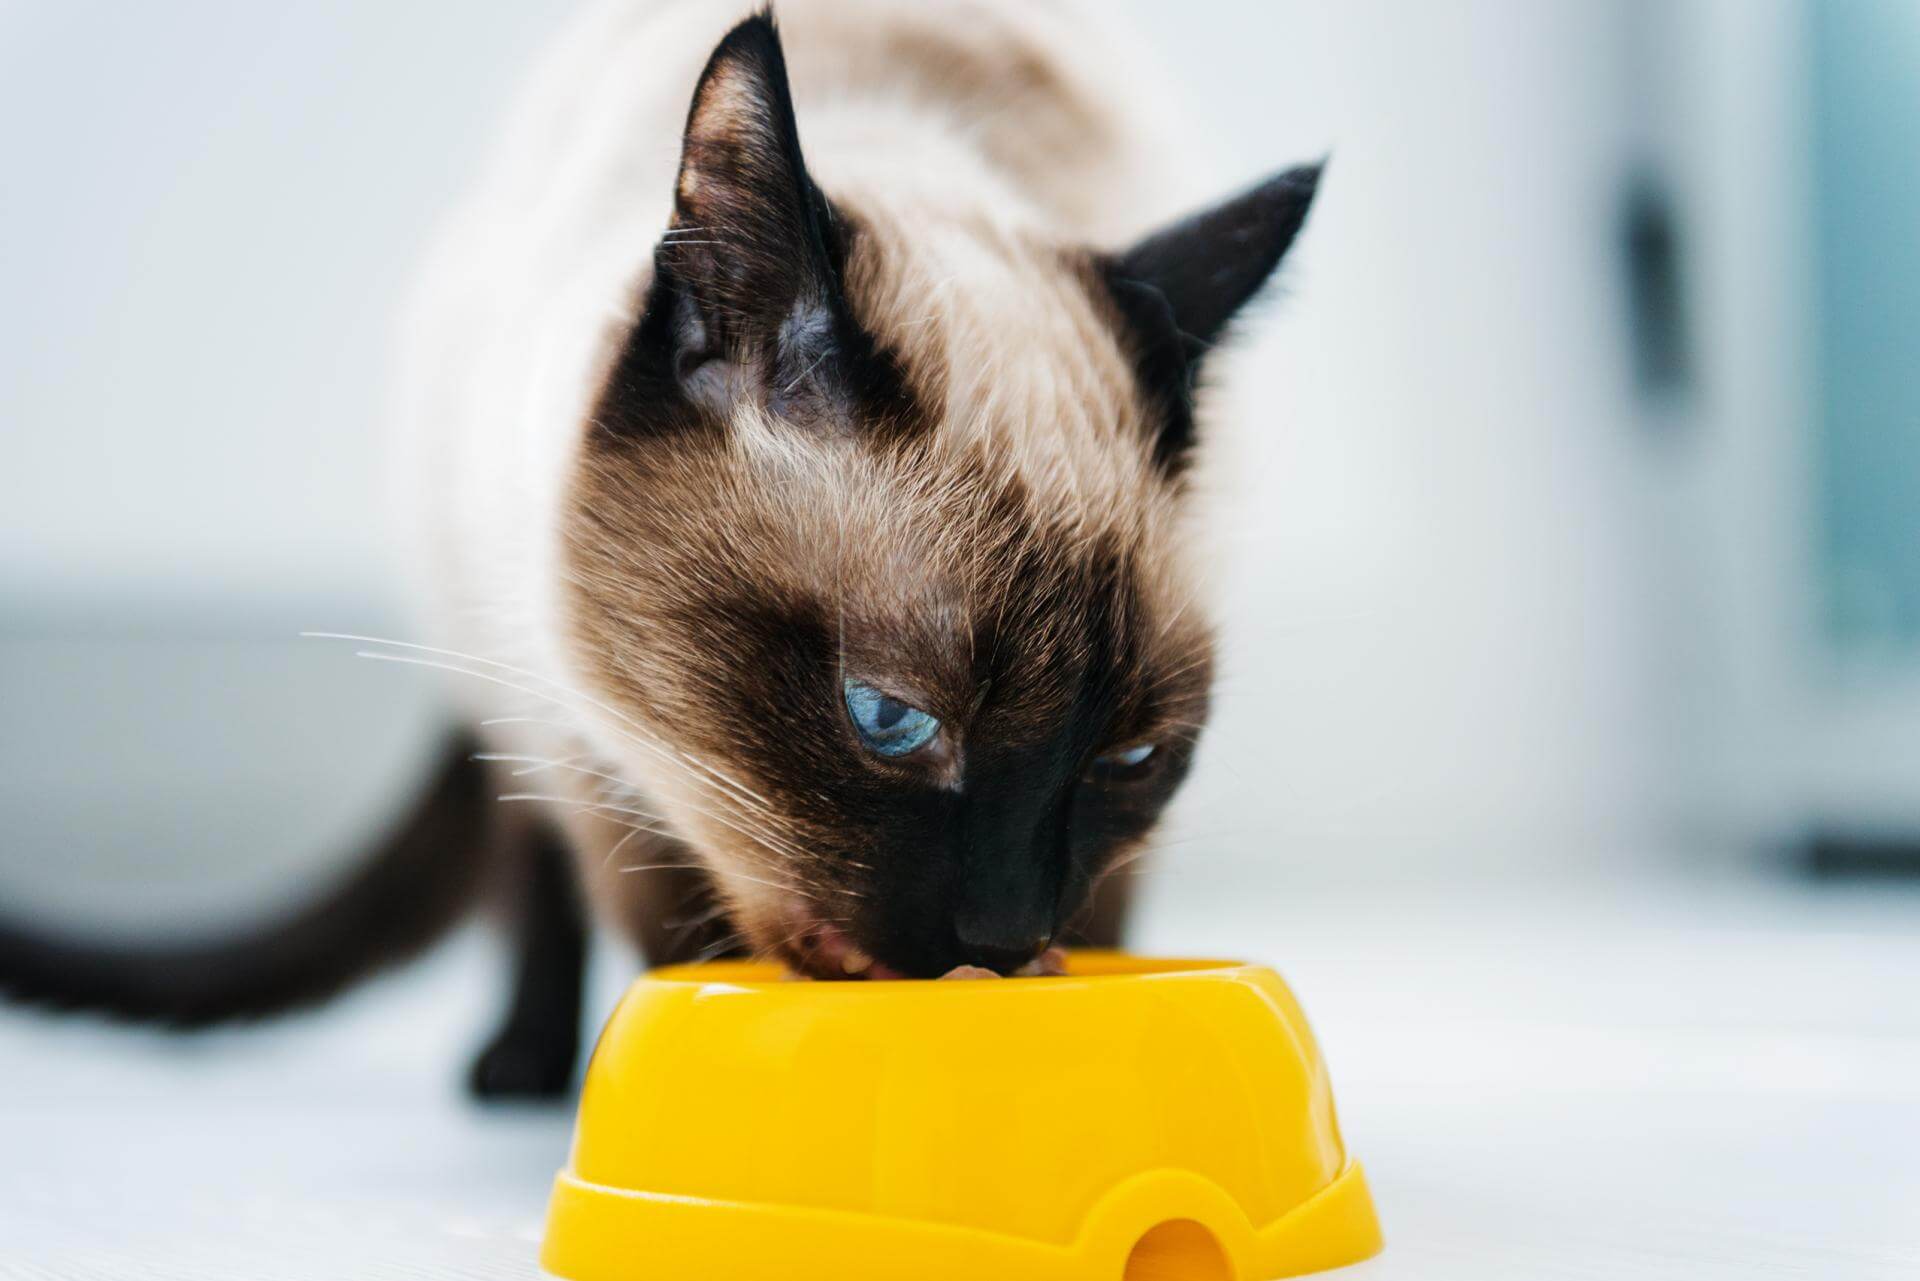 Food toxic to cats